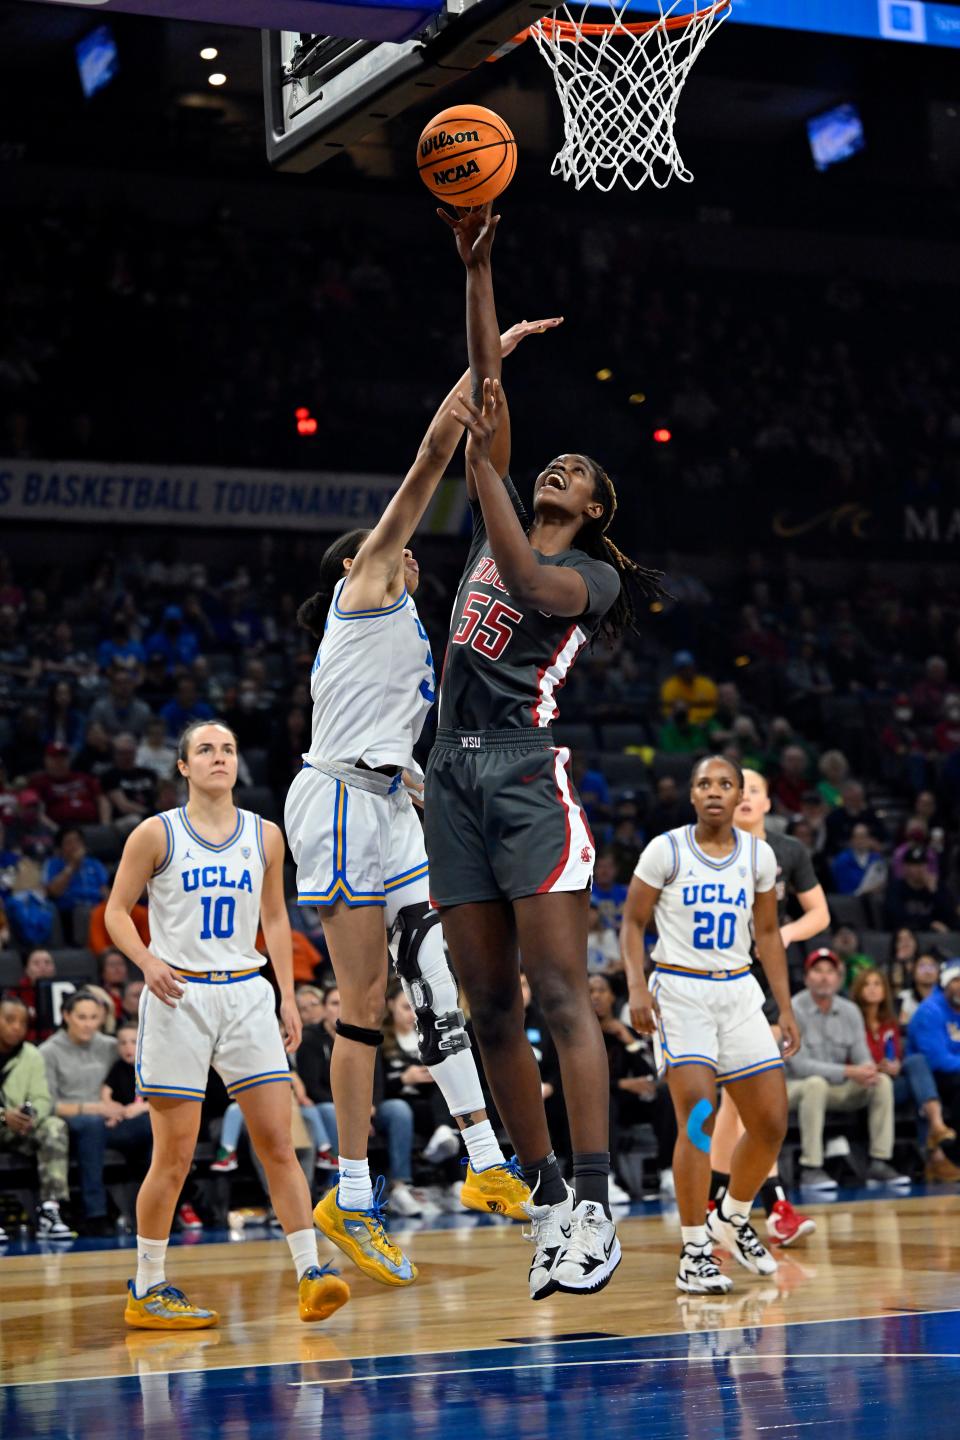 Washington State center Bella Murekatete (55) shoots against UCLA guard Camryn Brown during the first half of an NCAA college basketball game in the finals of the Pac-12 women's tournament Sunday, March 5, 2023, in Las Vegas. (AP Photo/David Becker)